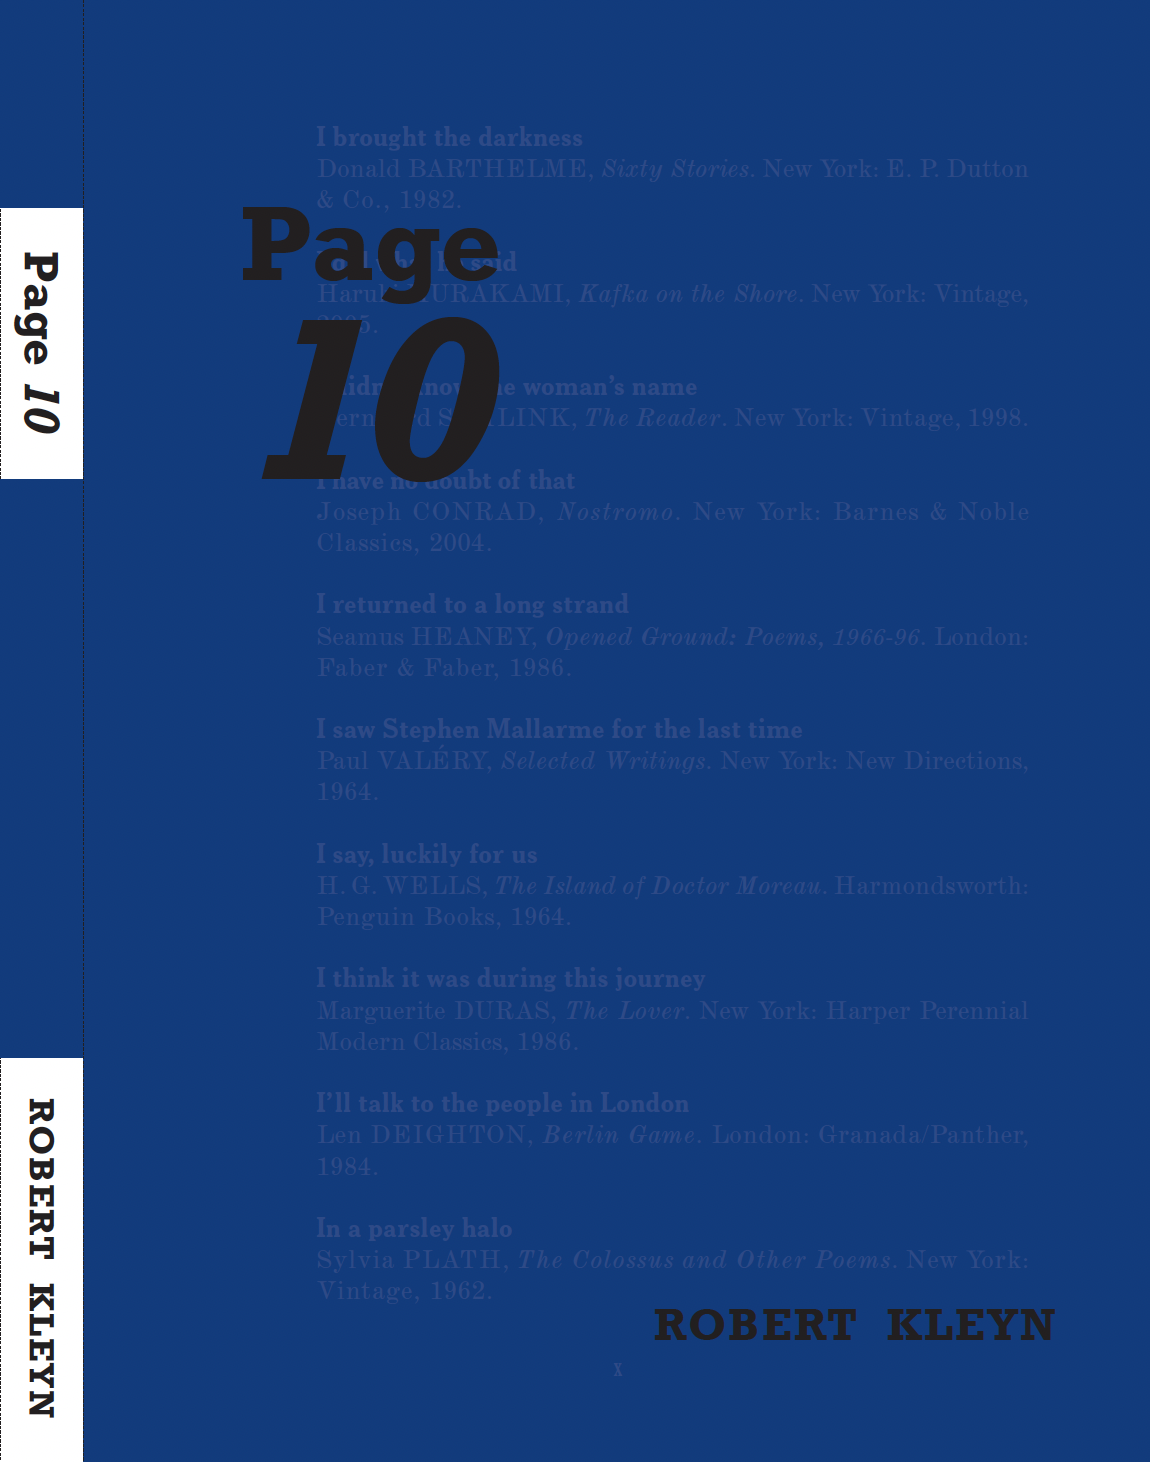 The cover of the book "Page 10" by Robert Kleyn. The cover is blue with faint blue text in the background. The title of the book and author's name are in bold black text.